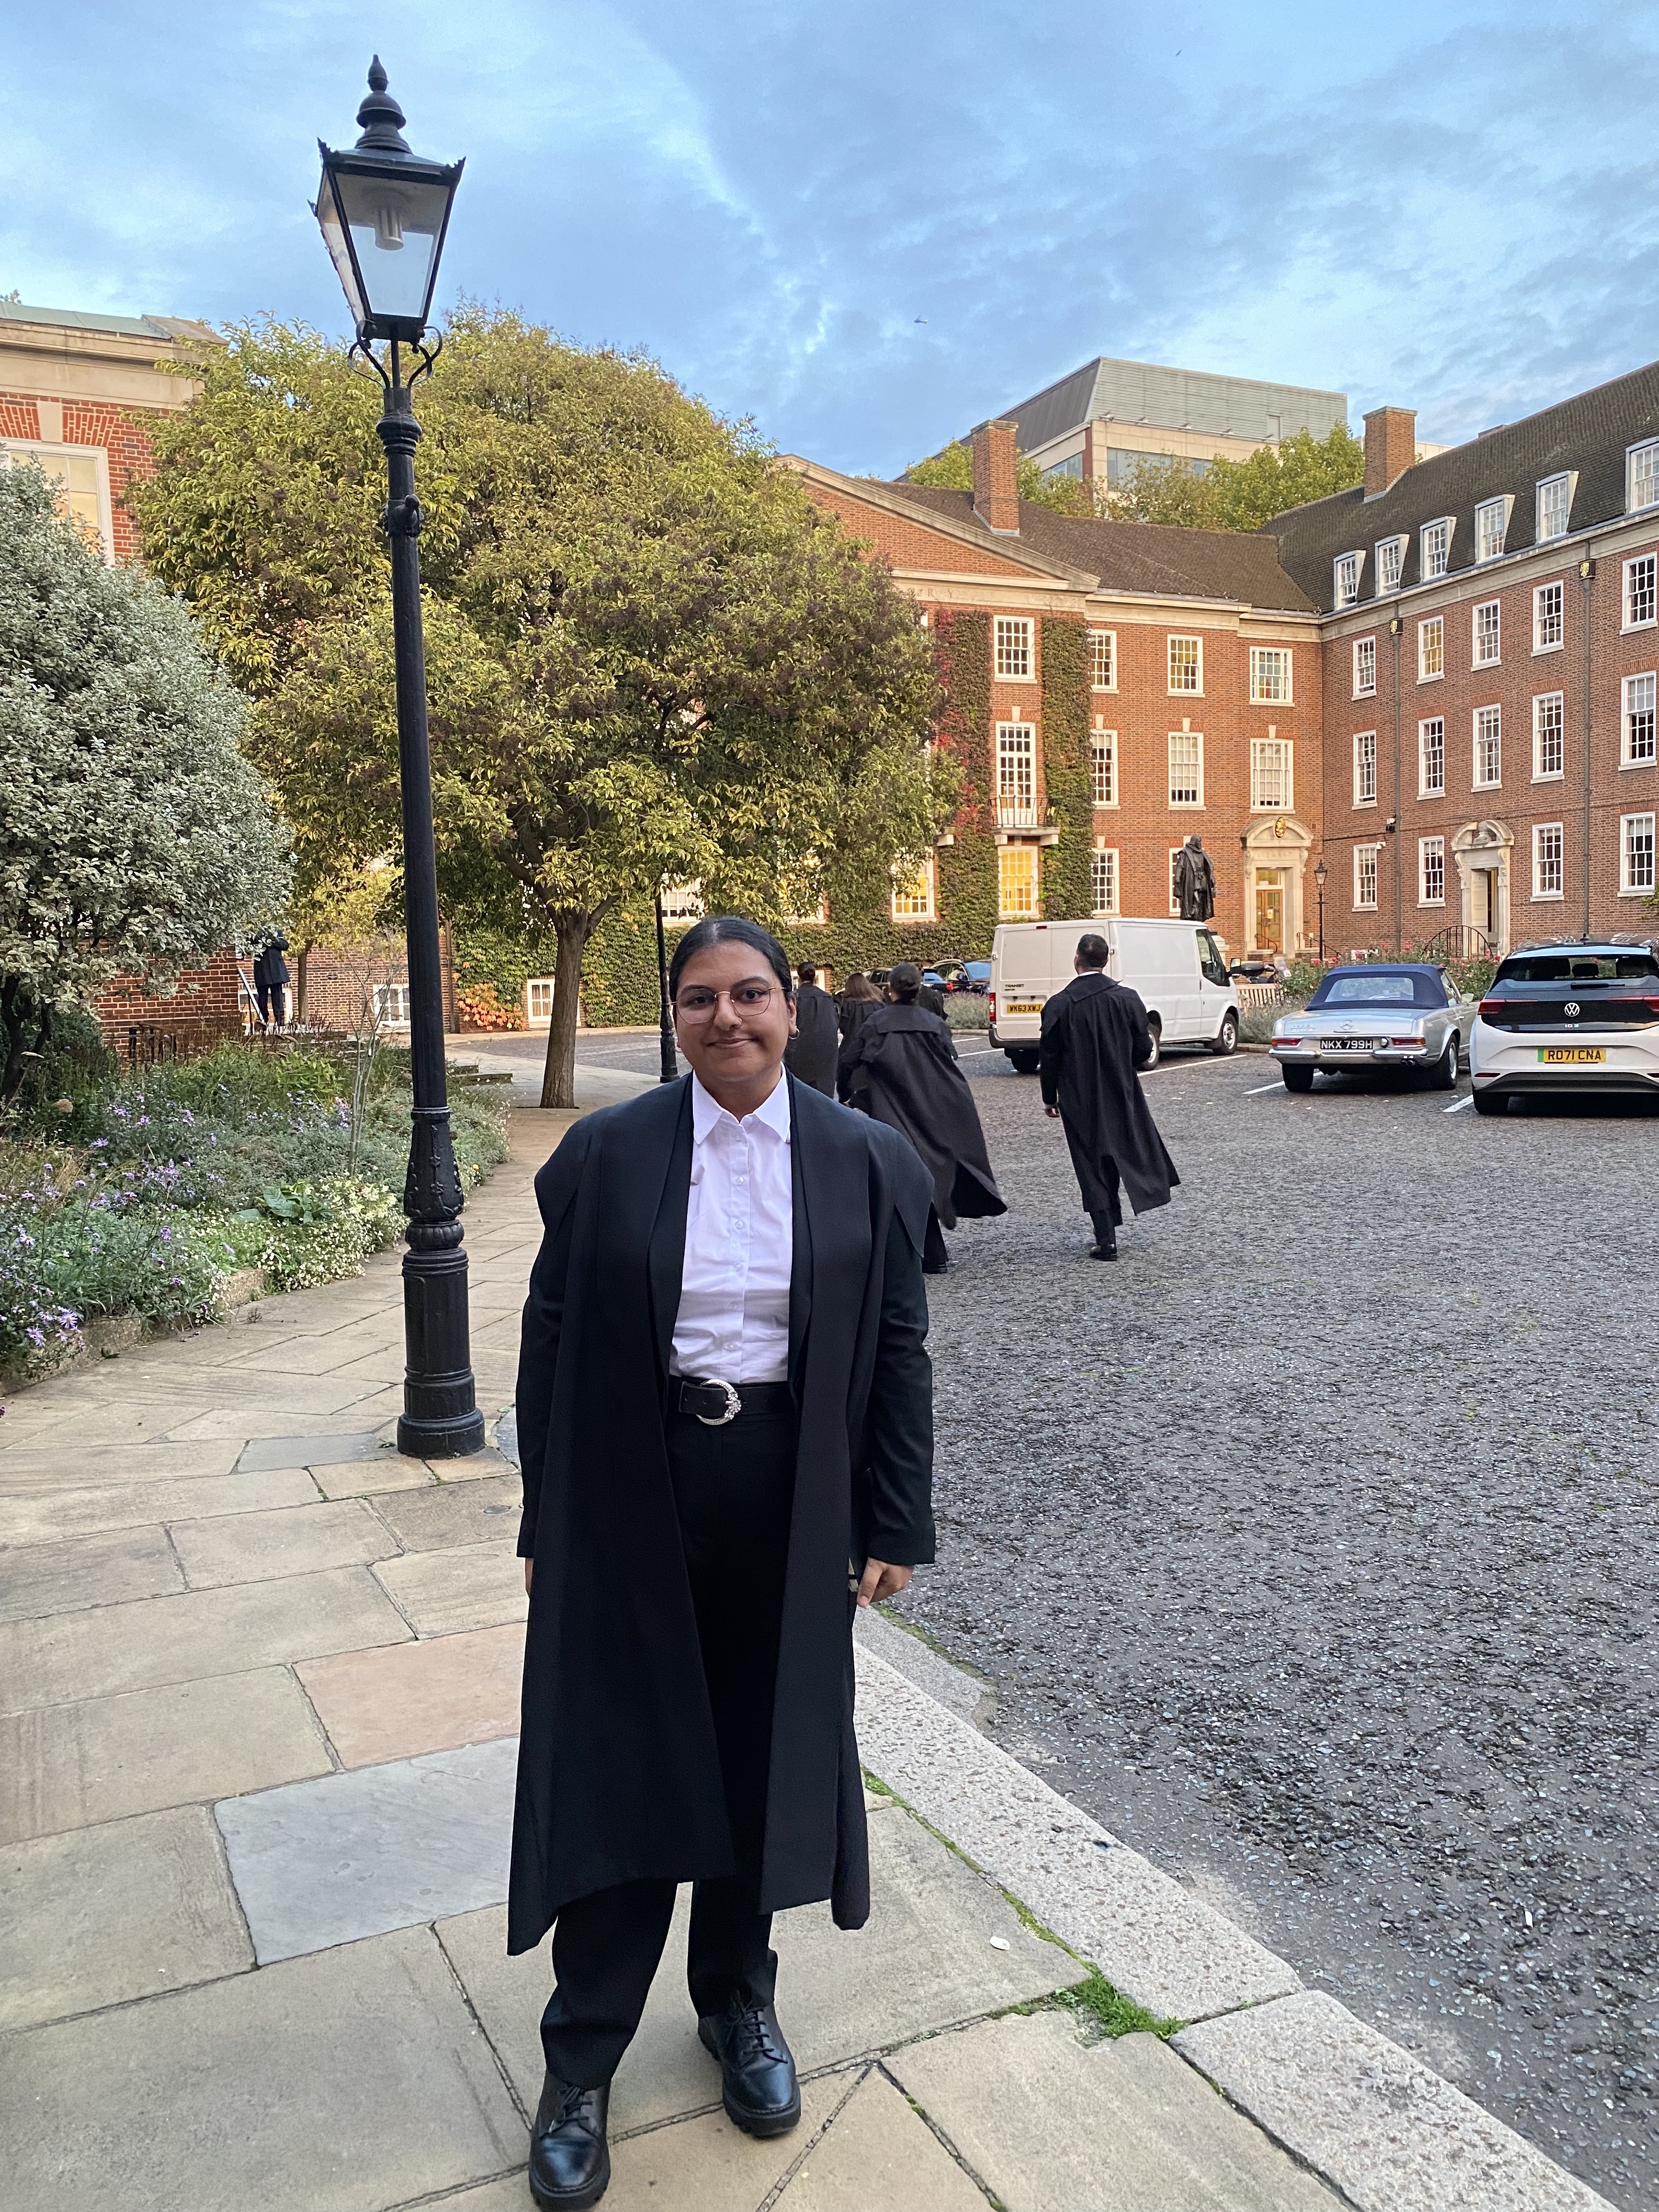 Maria is smiling in a black suit with a white shirt, a black student gown, in front of Gray's Inn.